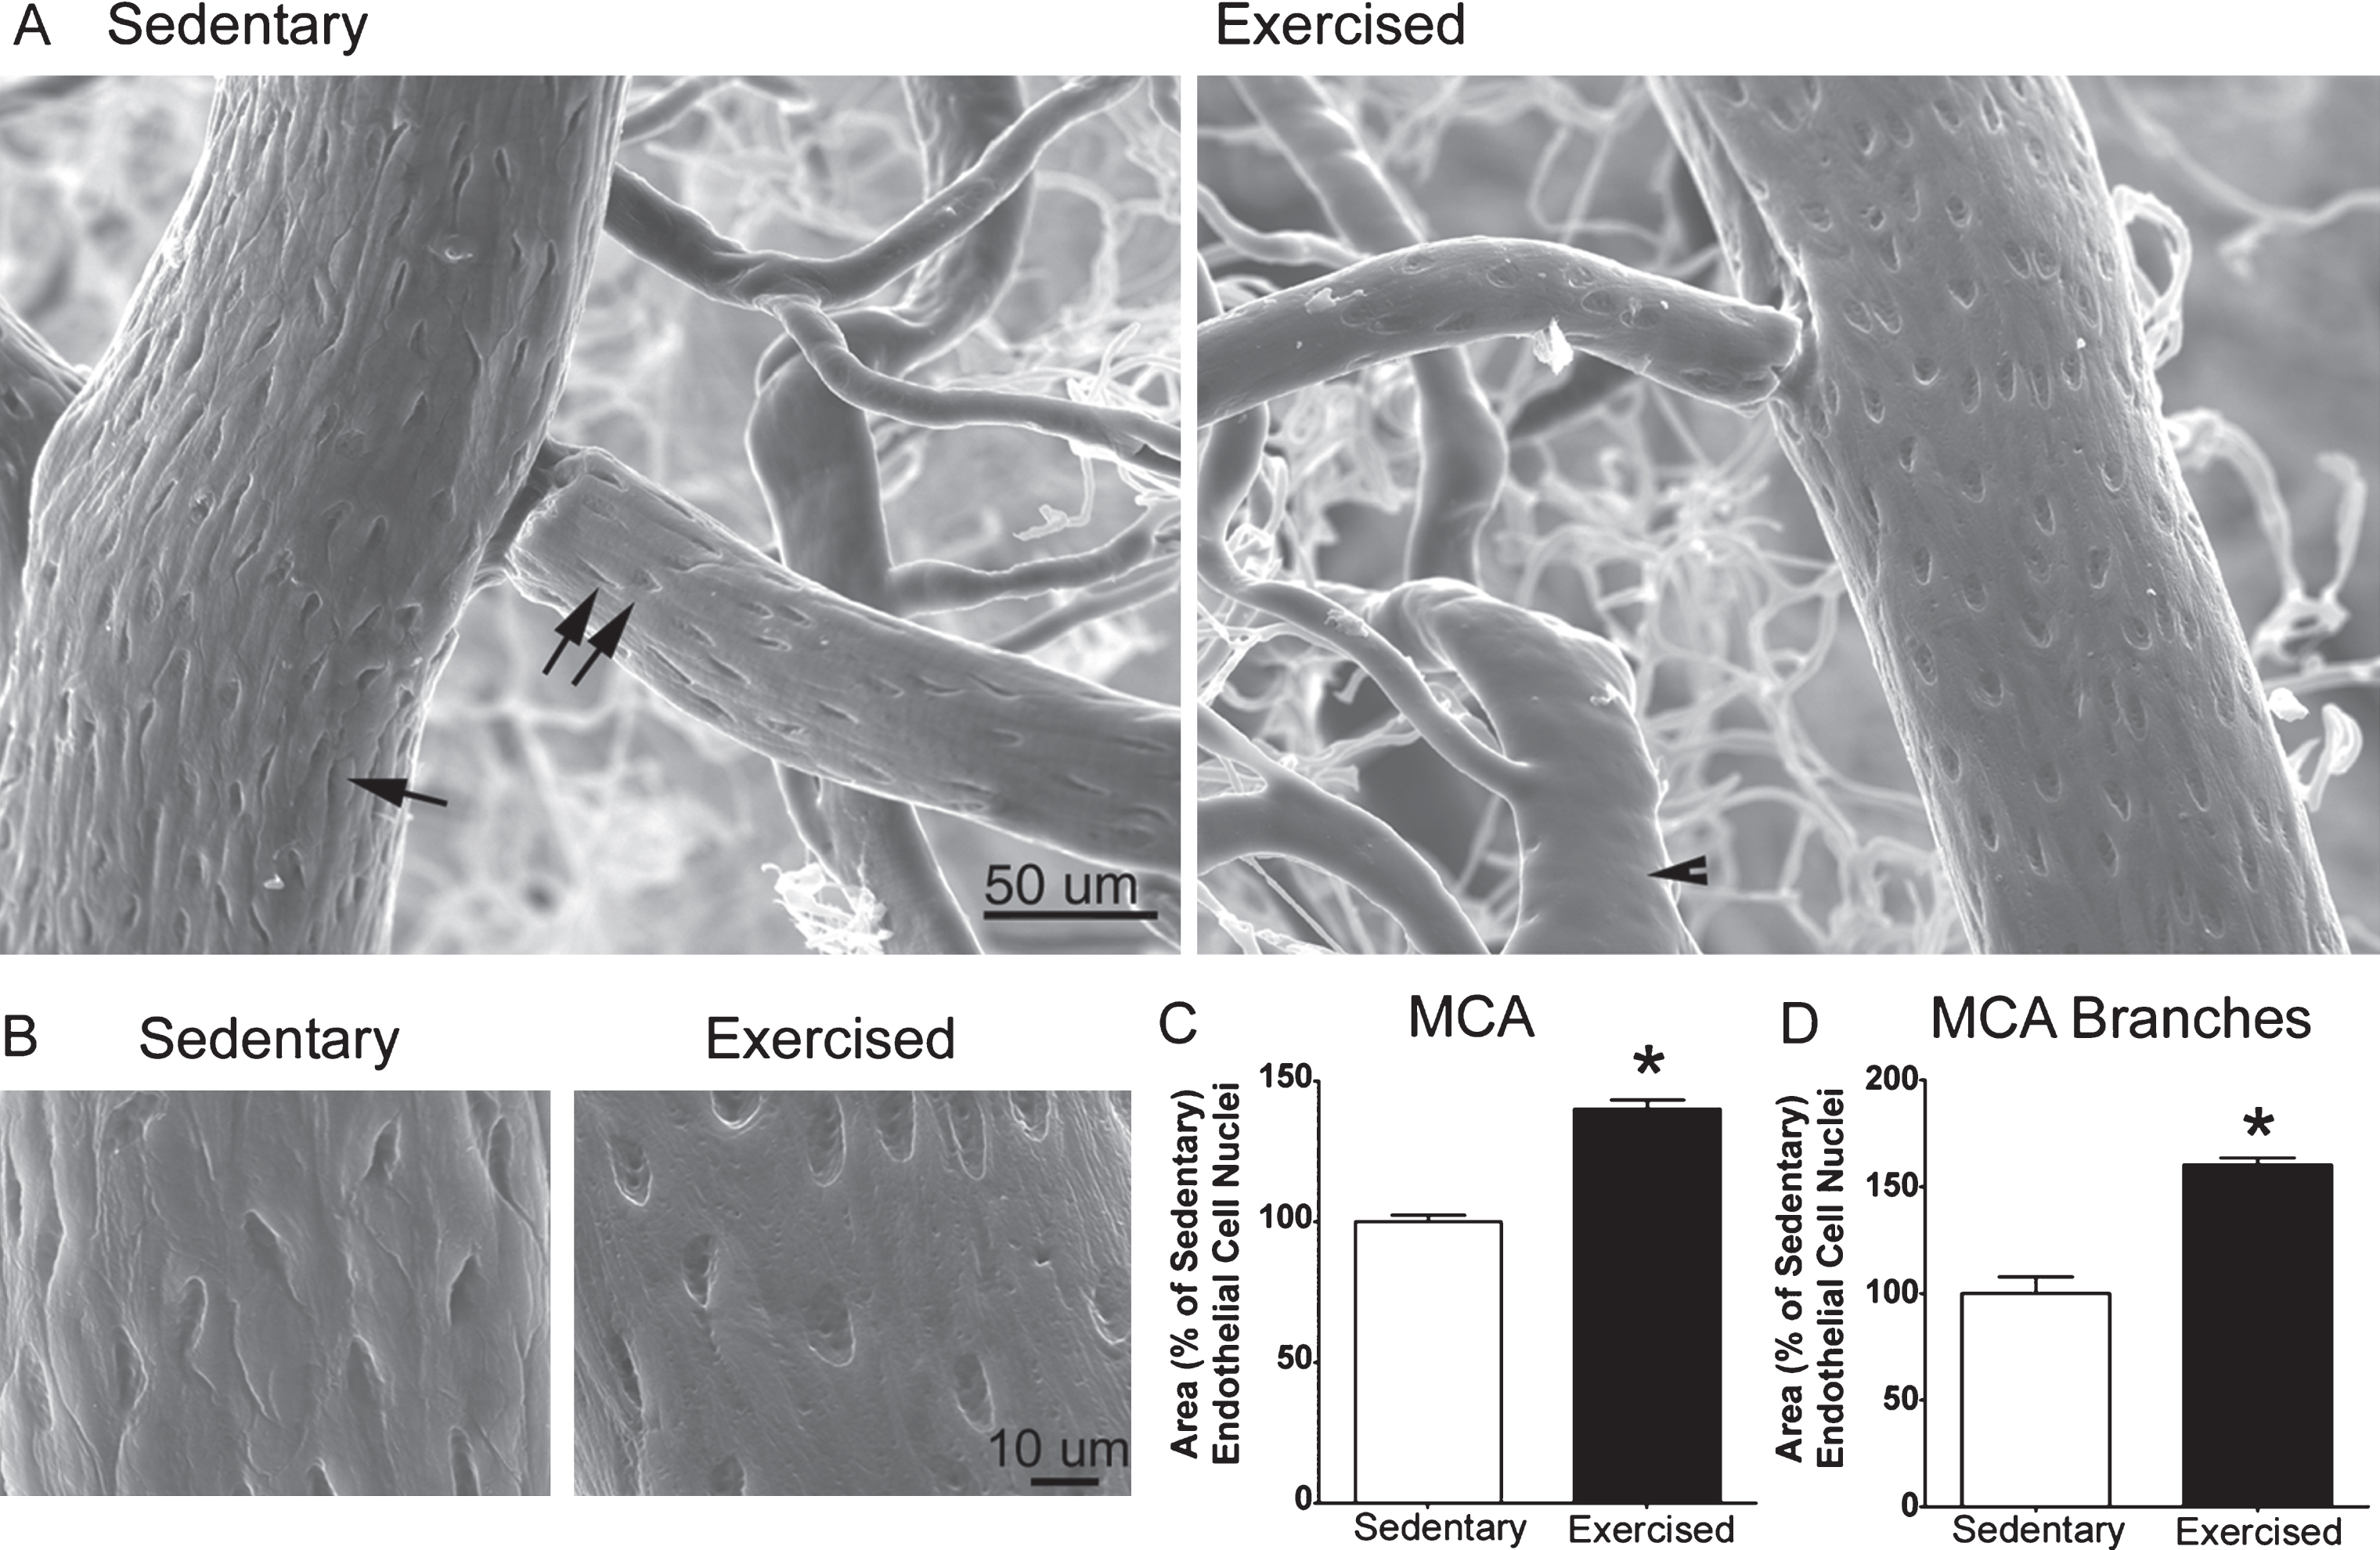 Scanning electron micrographs comparing cerebrovascular microstructure of sedentary and exercised middle-aged mice. A) Low magnification images of the middle cerebral artery (MCA) (single arrow) with branch (double arrow) in a sedentary (left) and exercised (right) mouse. Arteries are distinguished from veins (arrowhead) by the distinct impressions made by their endothelial cell nuclei (ECN). B) High magnification images of ECN imprints from the MCA in a sedentary (left) and exercised (right) mouse. C and D) Exercise increased the area of ECN in the MCA and its associated branches. *p < 0.005, t-test. Adapted with permission from Latimer, et al. [128].